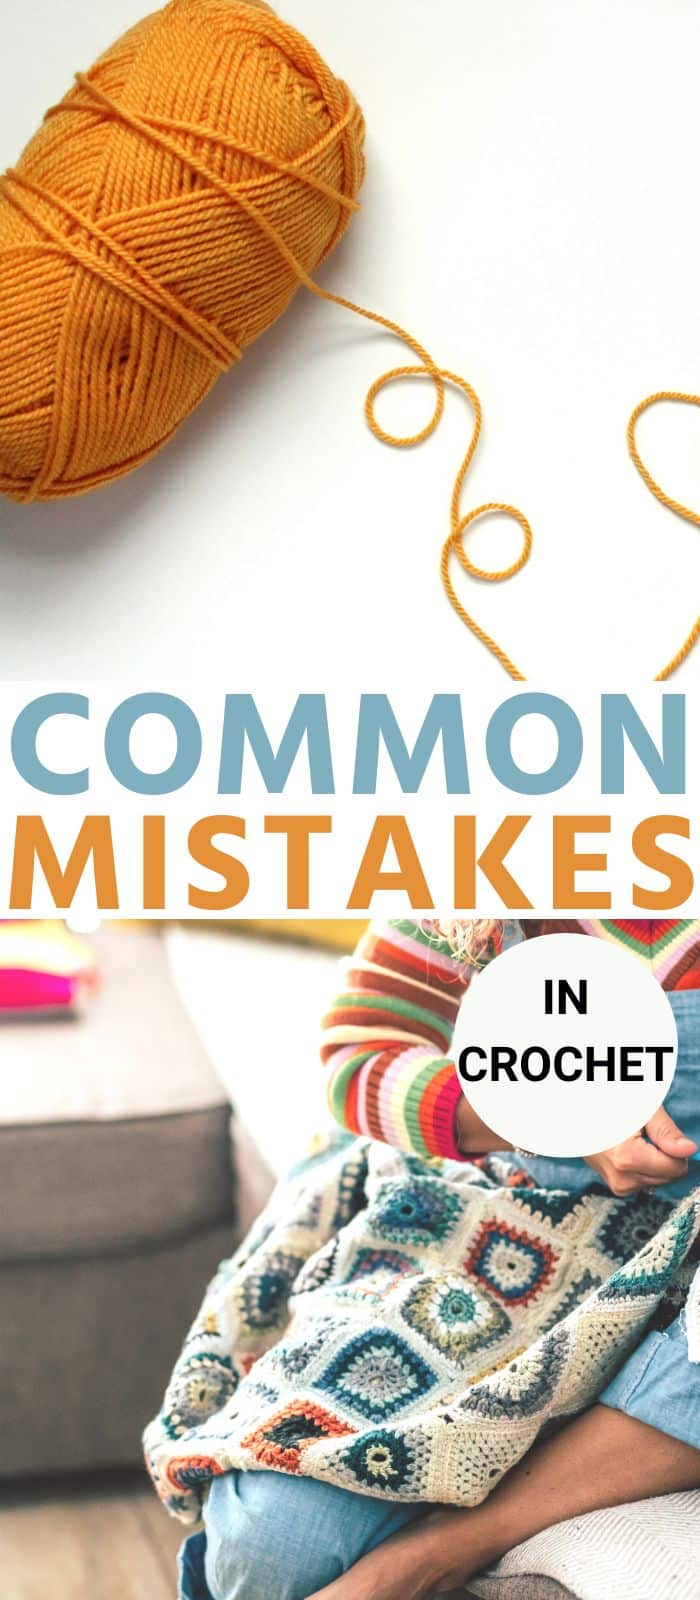 Common Crochet Mistakes and How to Avoid Them